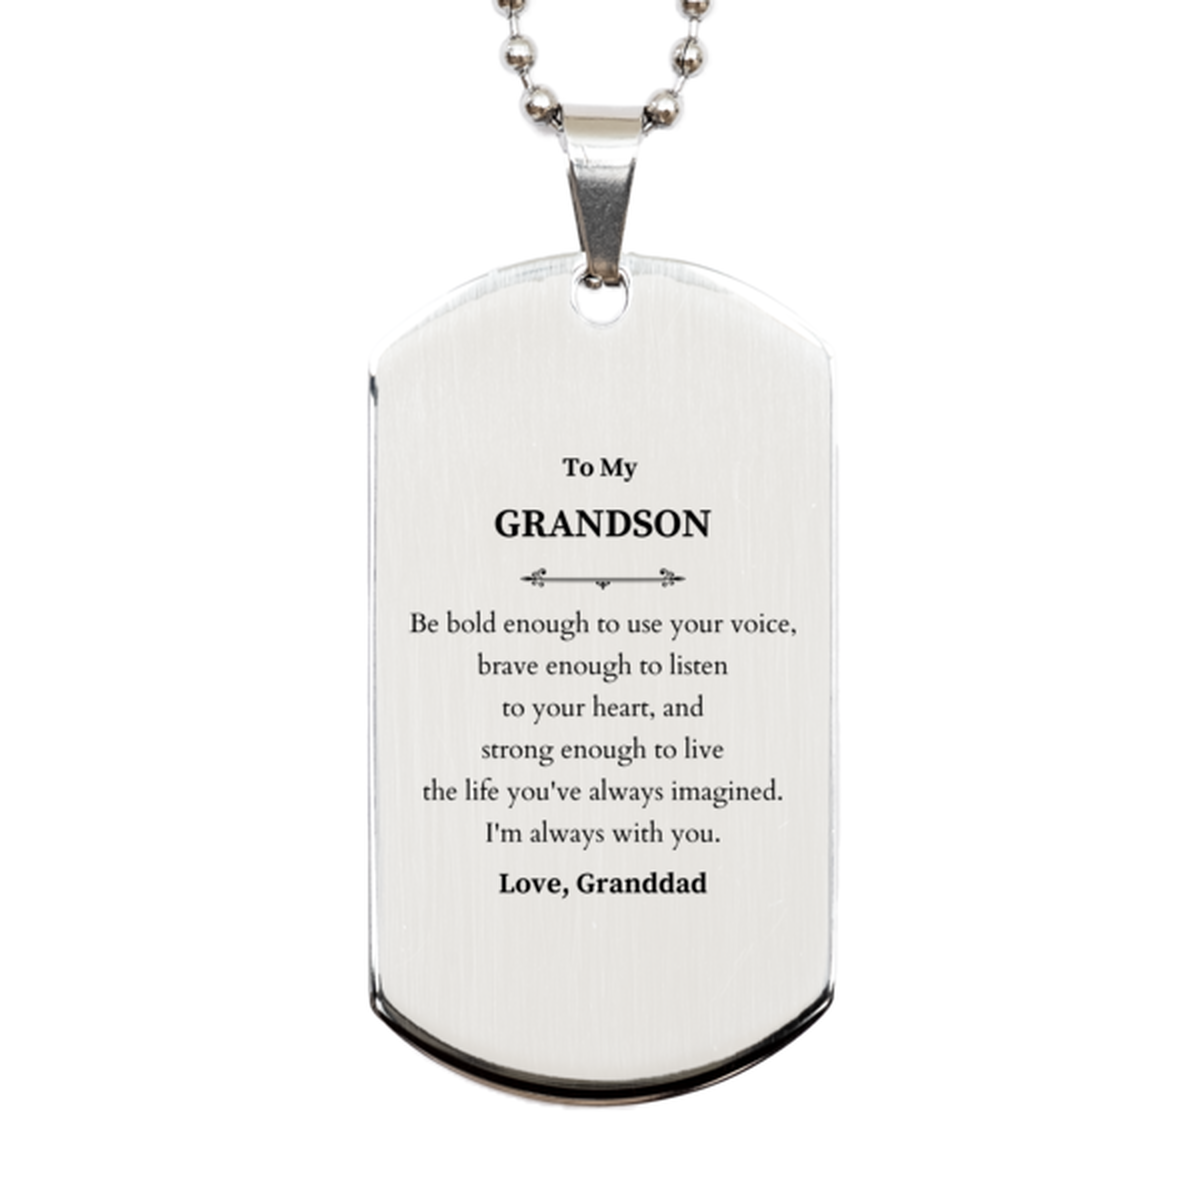 Keepsake Grandson Silver Dog Tag Gift Idea Graduation Christmas Birthday Grandson from Granddad, Grandson Be bold enough to use your voice, brave enough to listen to your heart. Love, Granddad